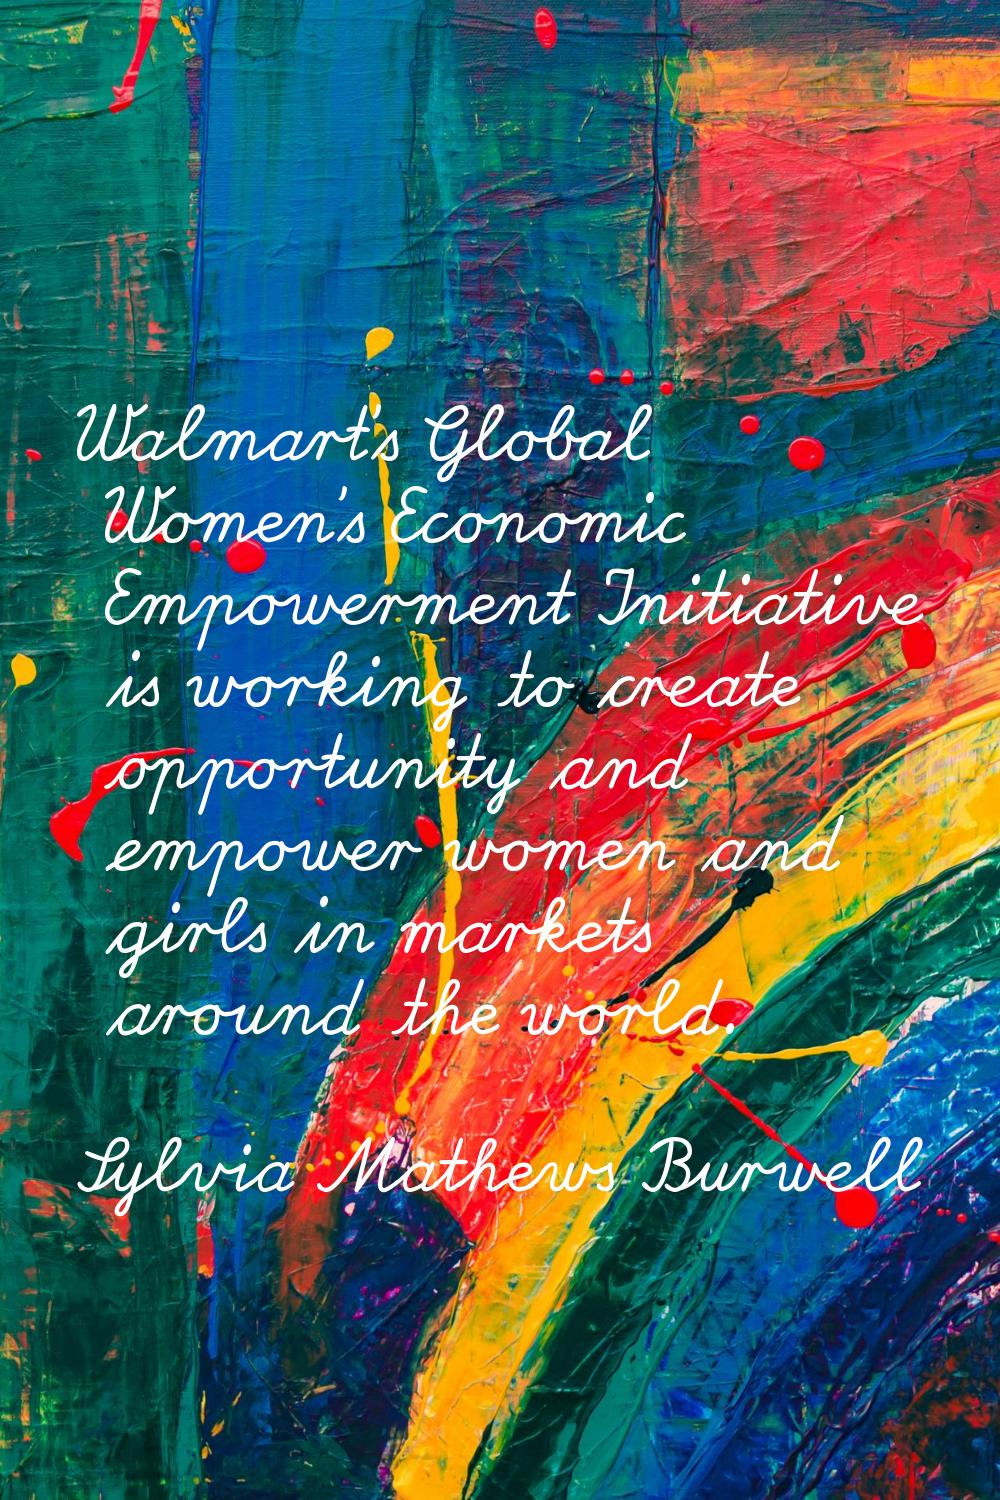 Walmart's Global Women's Economic Empowerment Initiative is working to create opportunity and empow